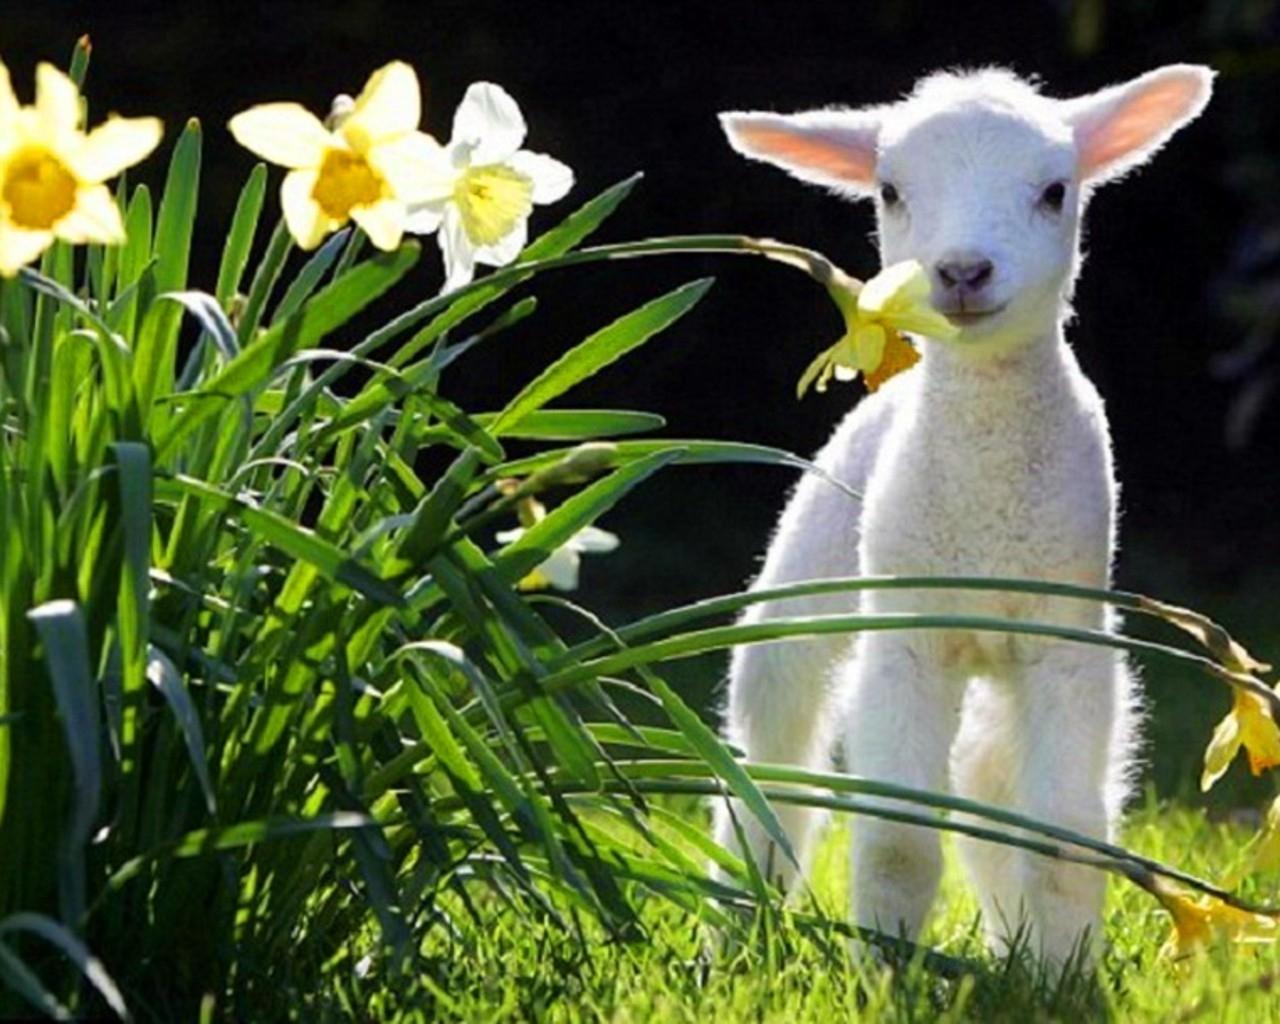 Free download animals grass spring lamb daffodils lambs white